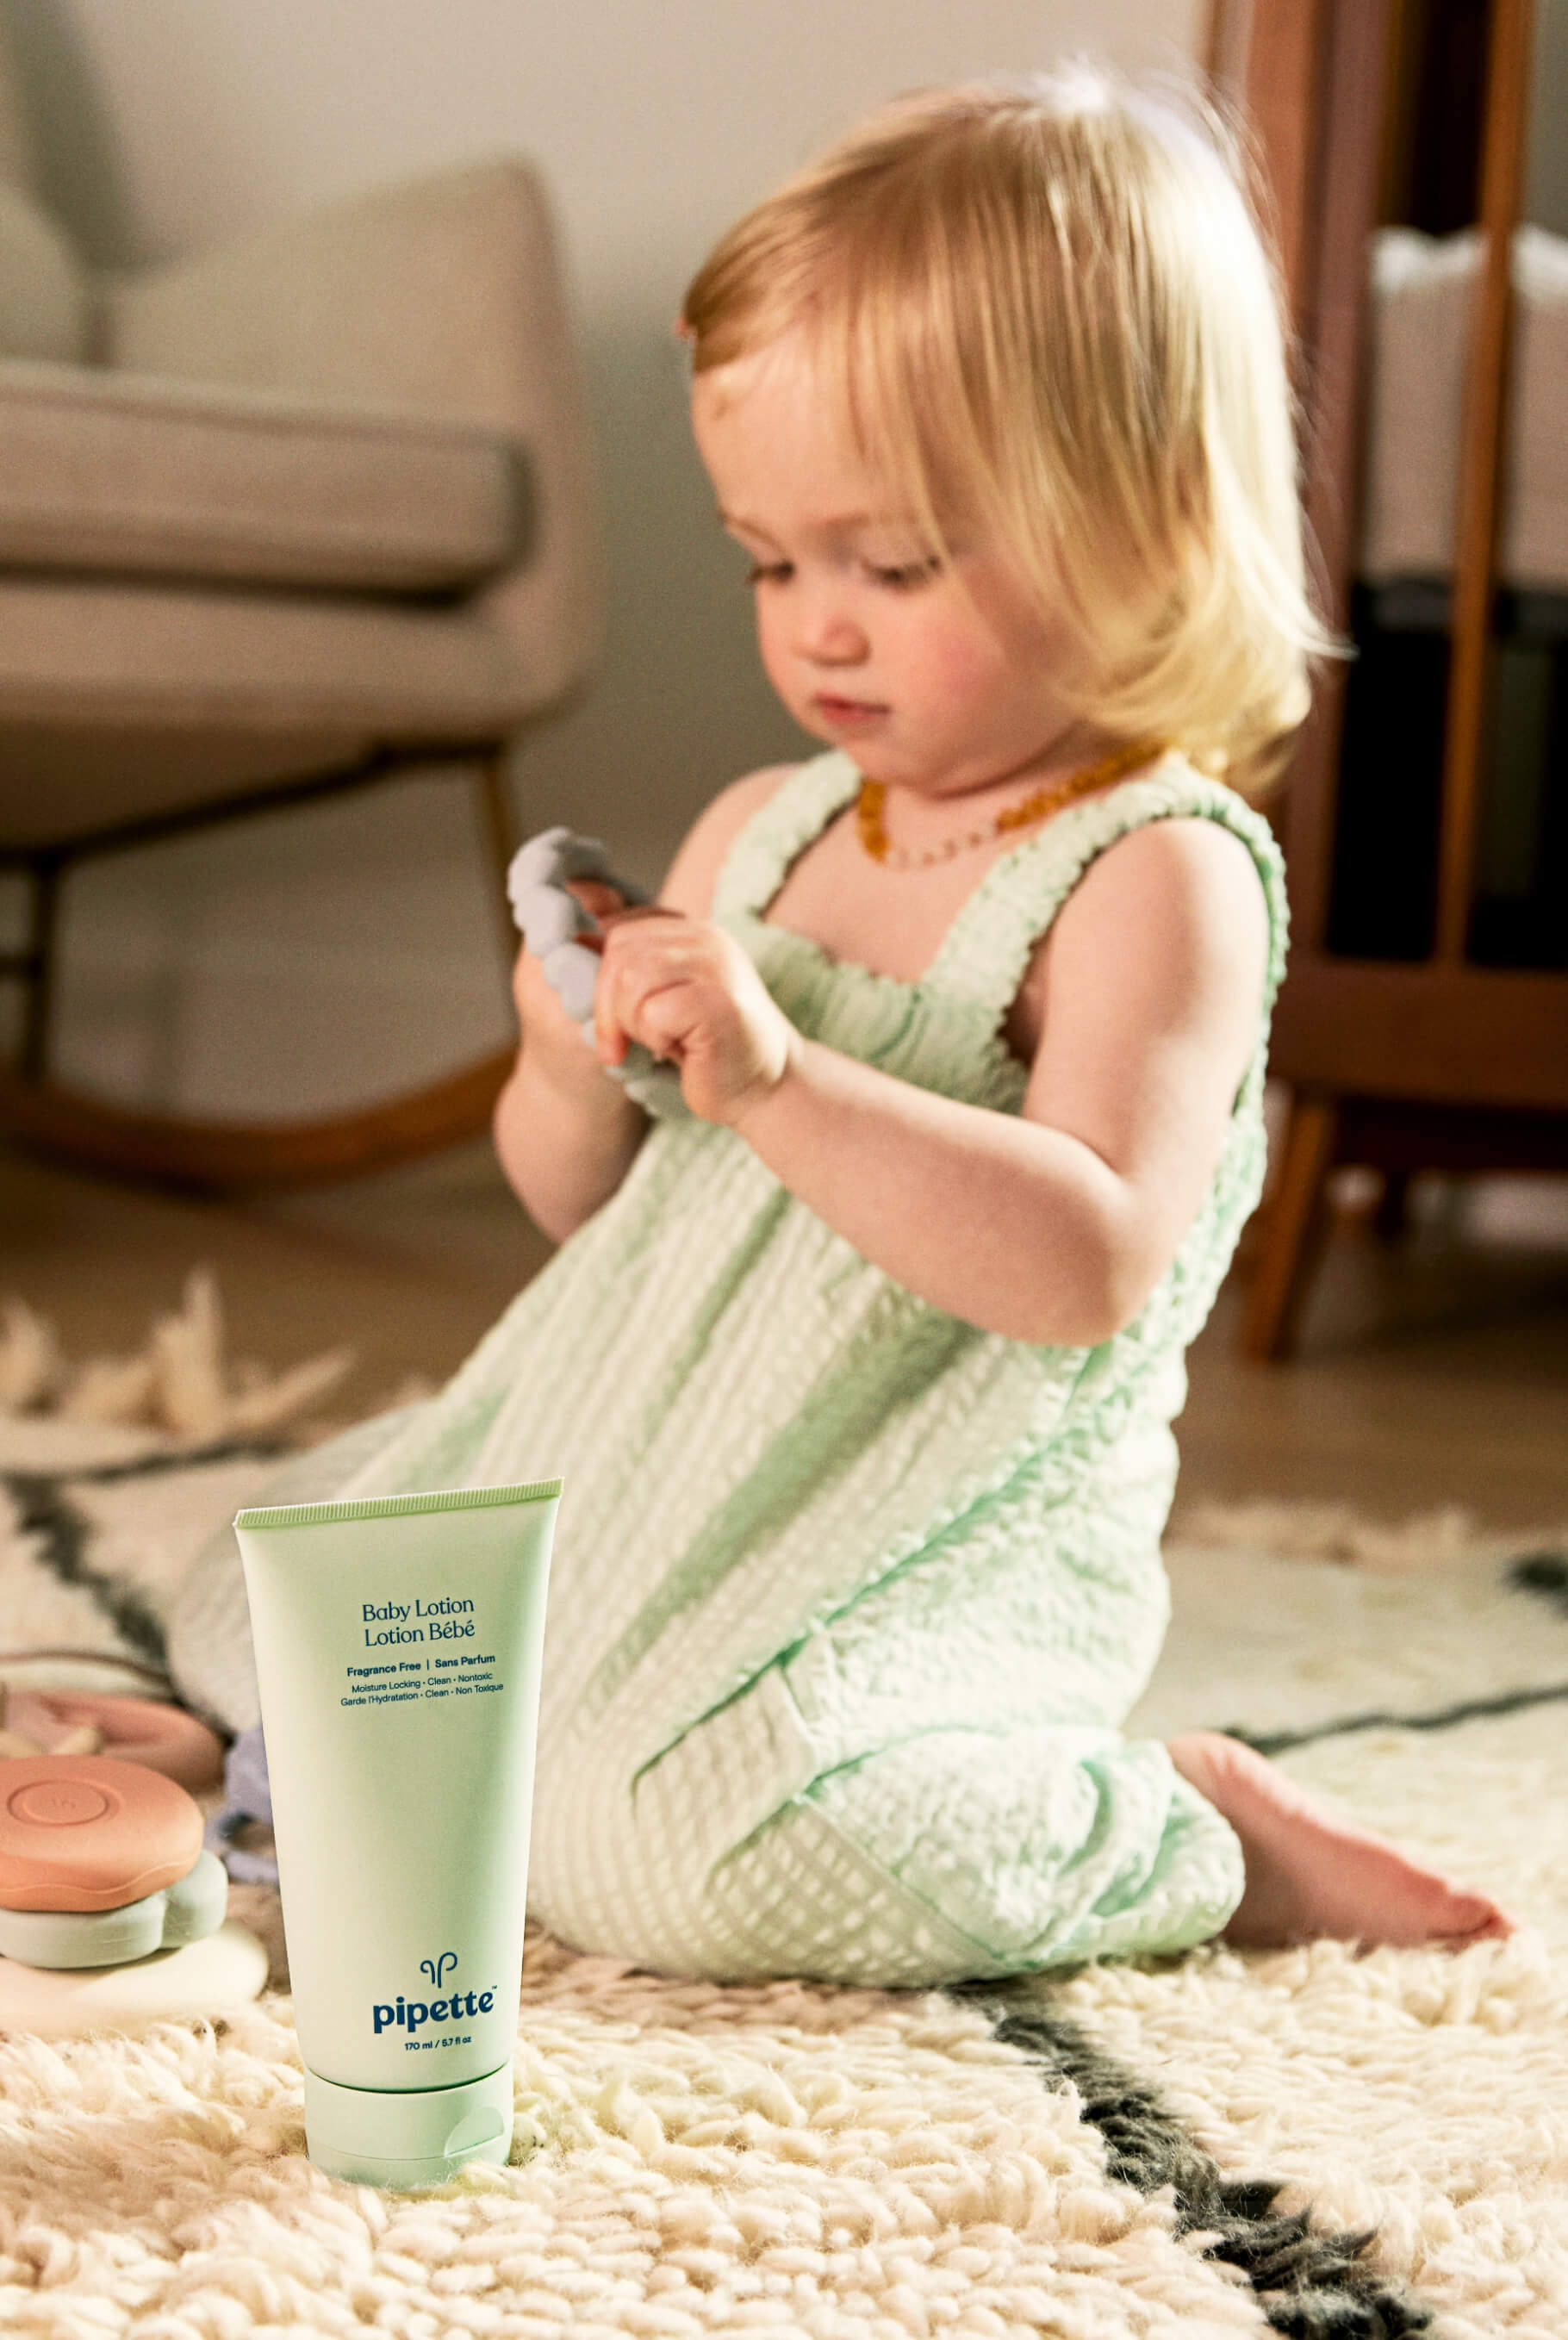 Gentle, Nontoxic and 100% Clean Skincare for Mom & Baby